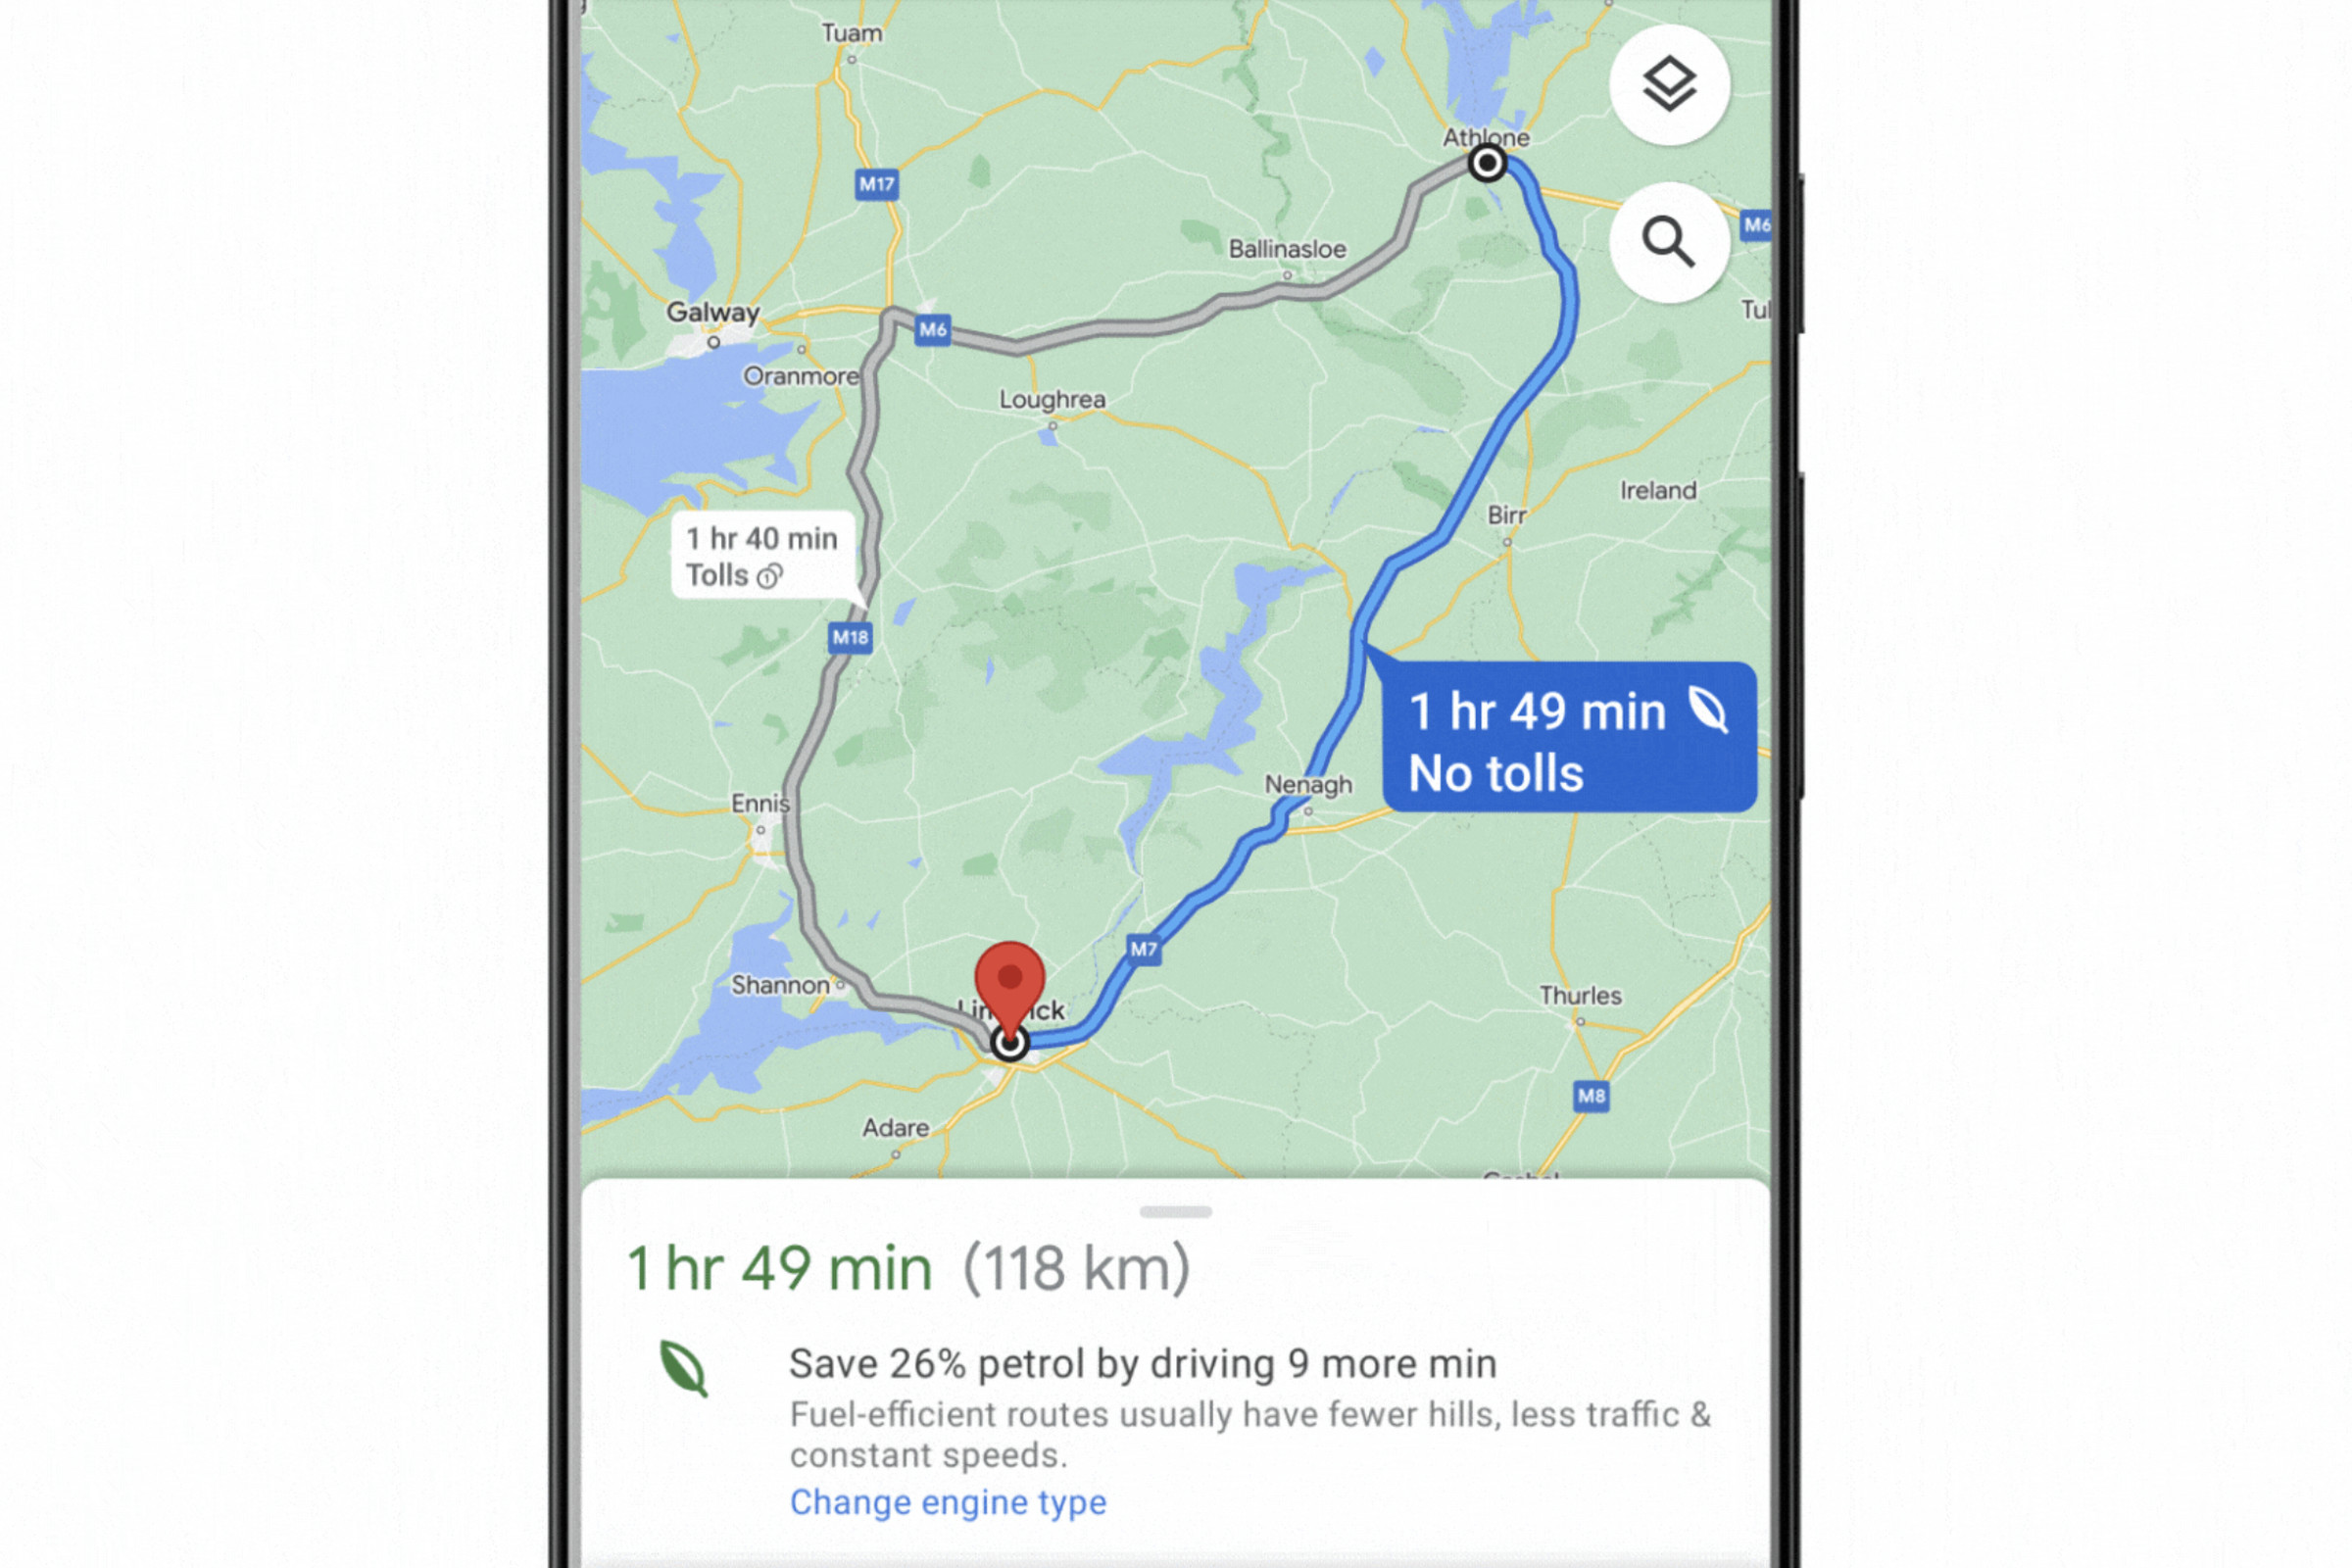 Image of Google Maps displaying an eco-friendly route, along with information on how much gas it’ll use compared to a less fuel-efficient route.